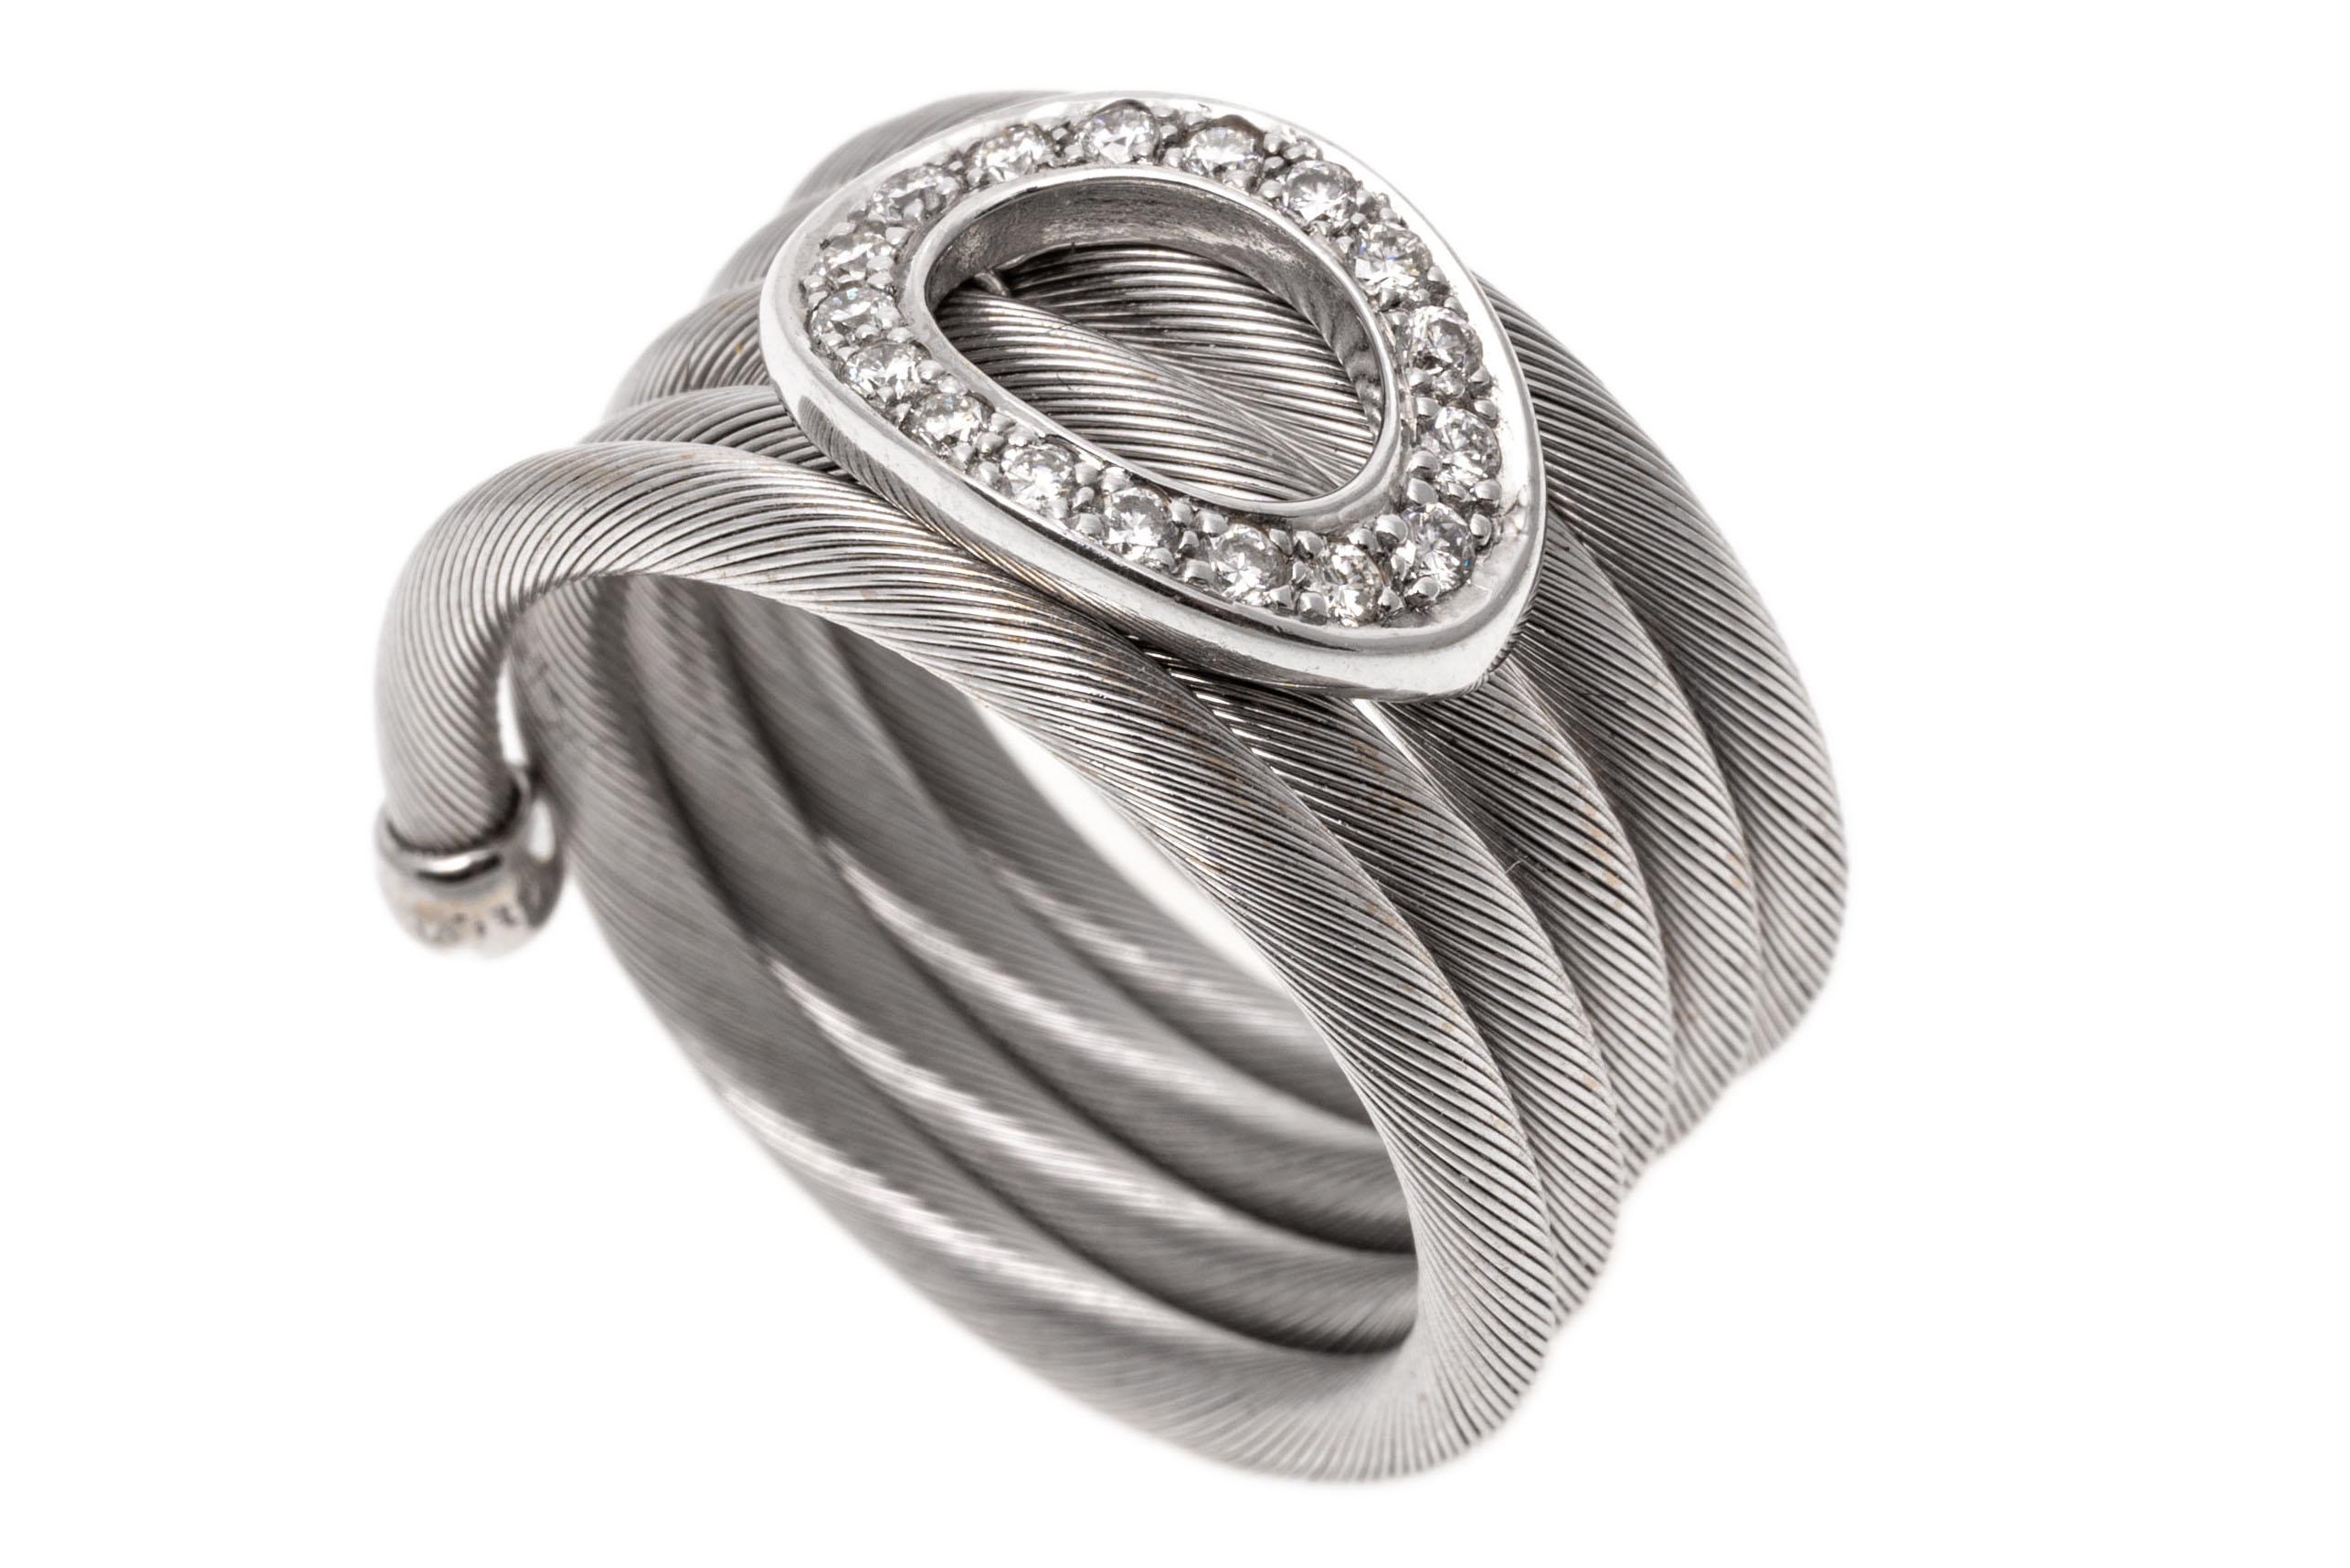 14k white gold ring. This unusual ring is wide, with five rows of finely ribbed, flexible coils, decorated in the center with an open oval, set with round faceted diamonds, approximately 0.17 TCW, prong set. The ring is finished with high polished